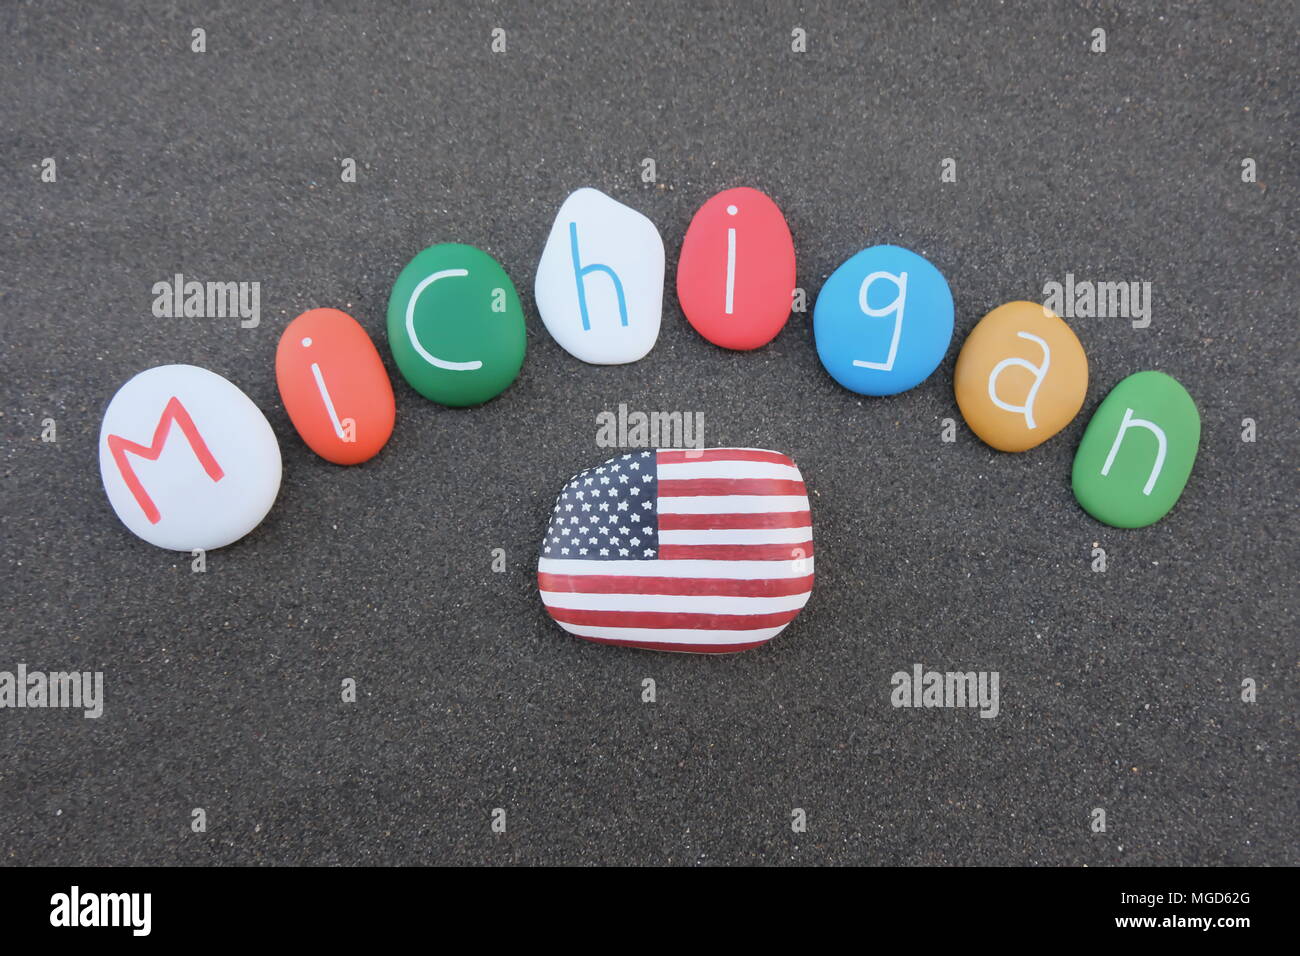 Michigan, United States of America, souvenir with colored stones over black volcanic sand Stock Photo